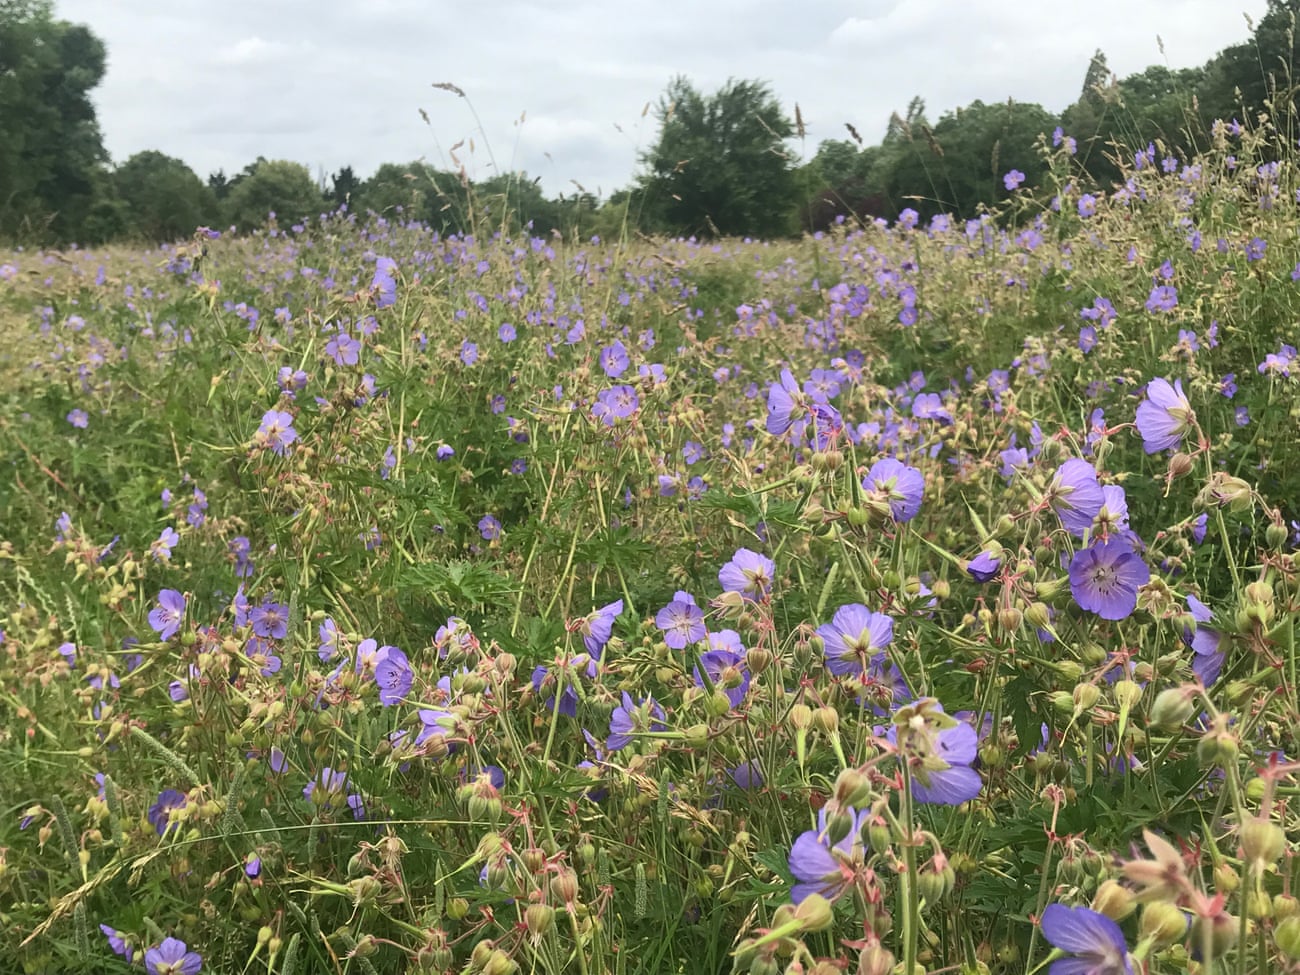 Wildflowers bloom on Peckham Rye common in south London